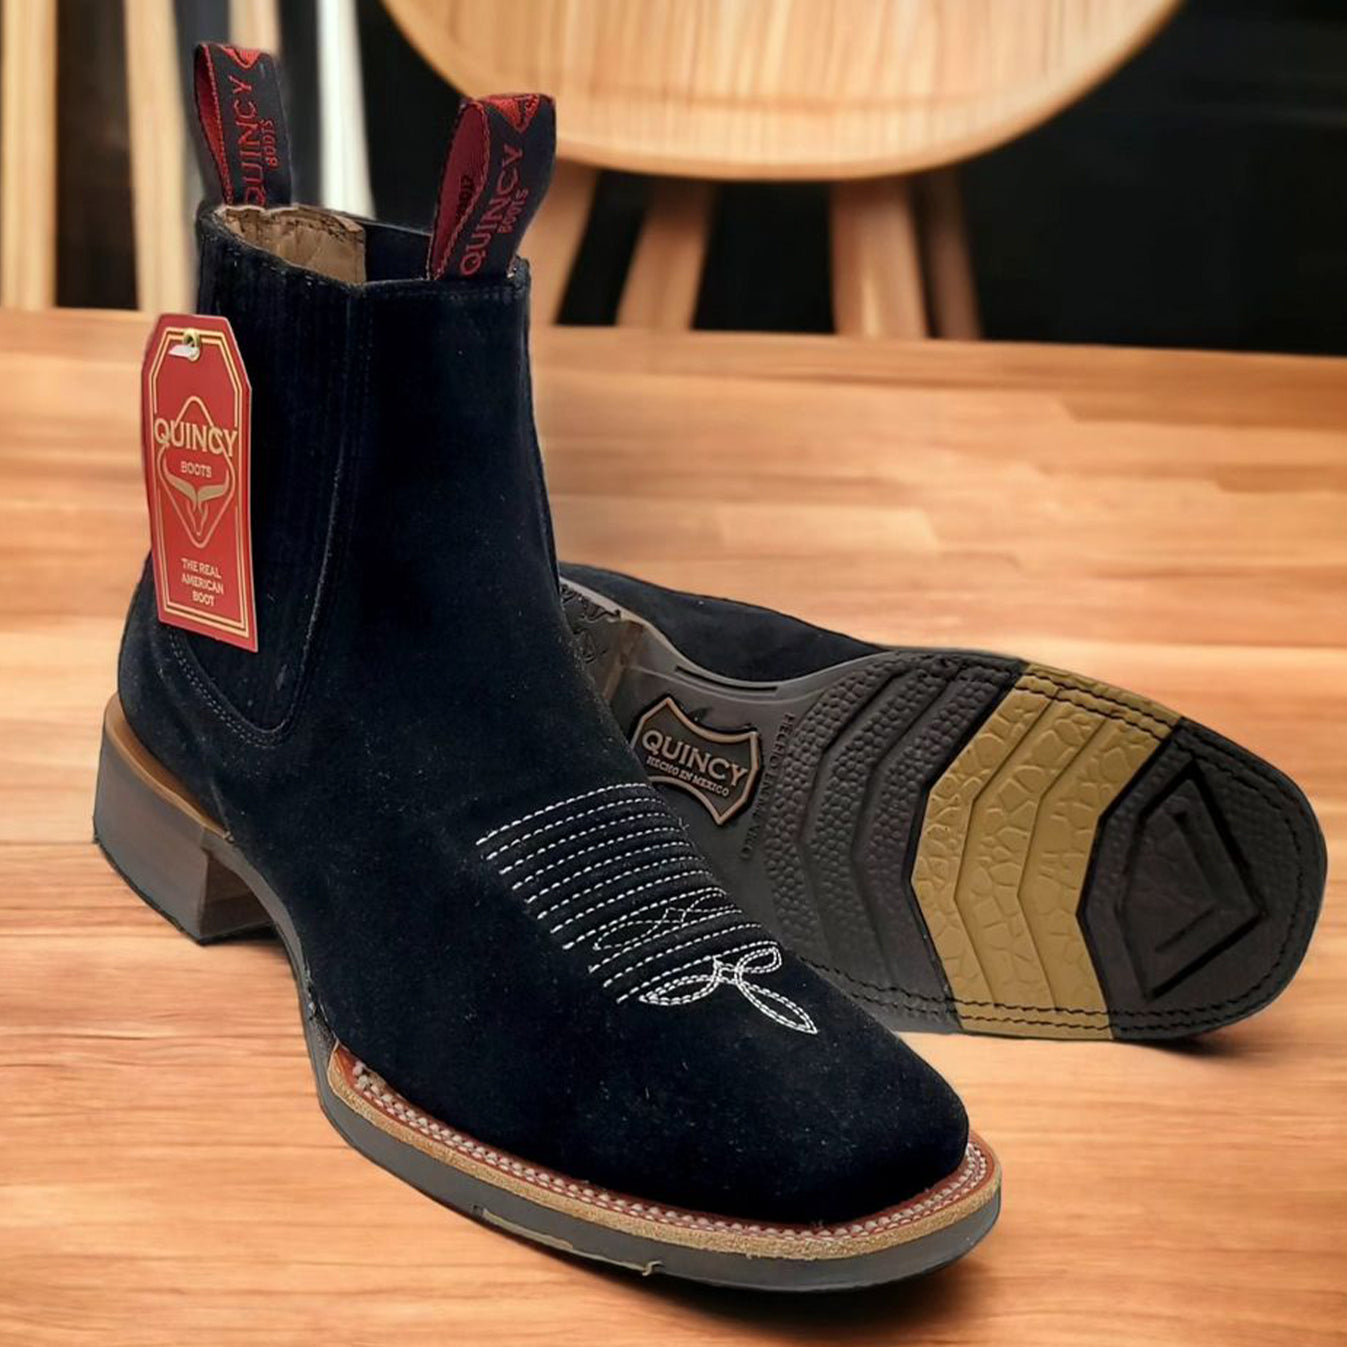 Mens Black Suede Boots  by Quincy Boots